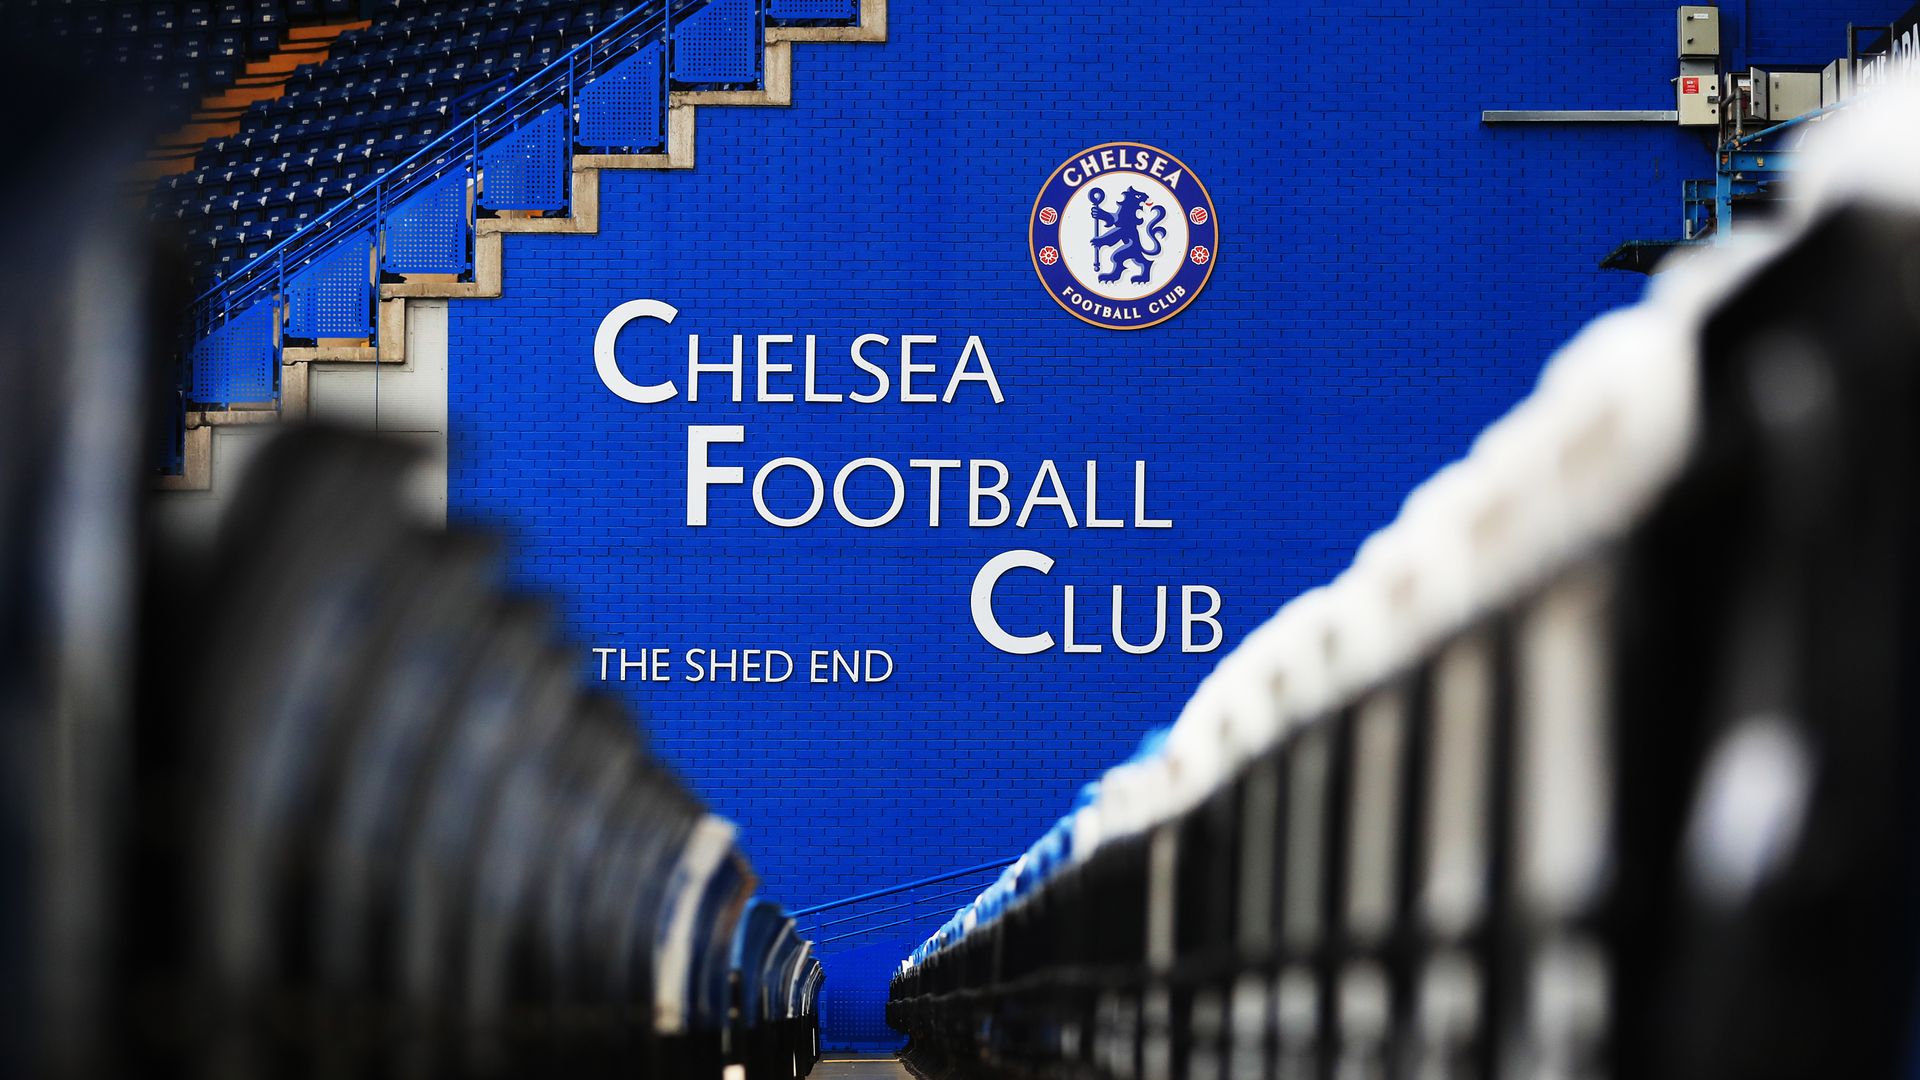 Chelsea 'could become toxic brand for investors'